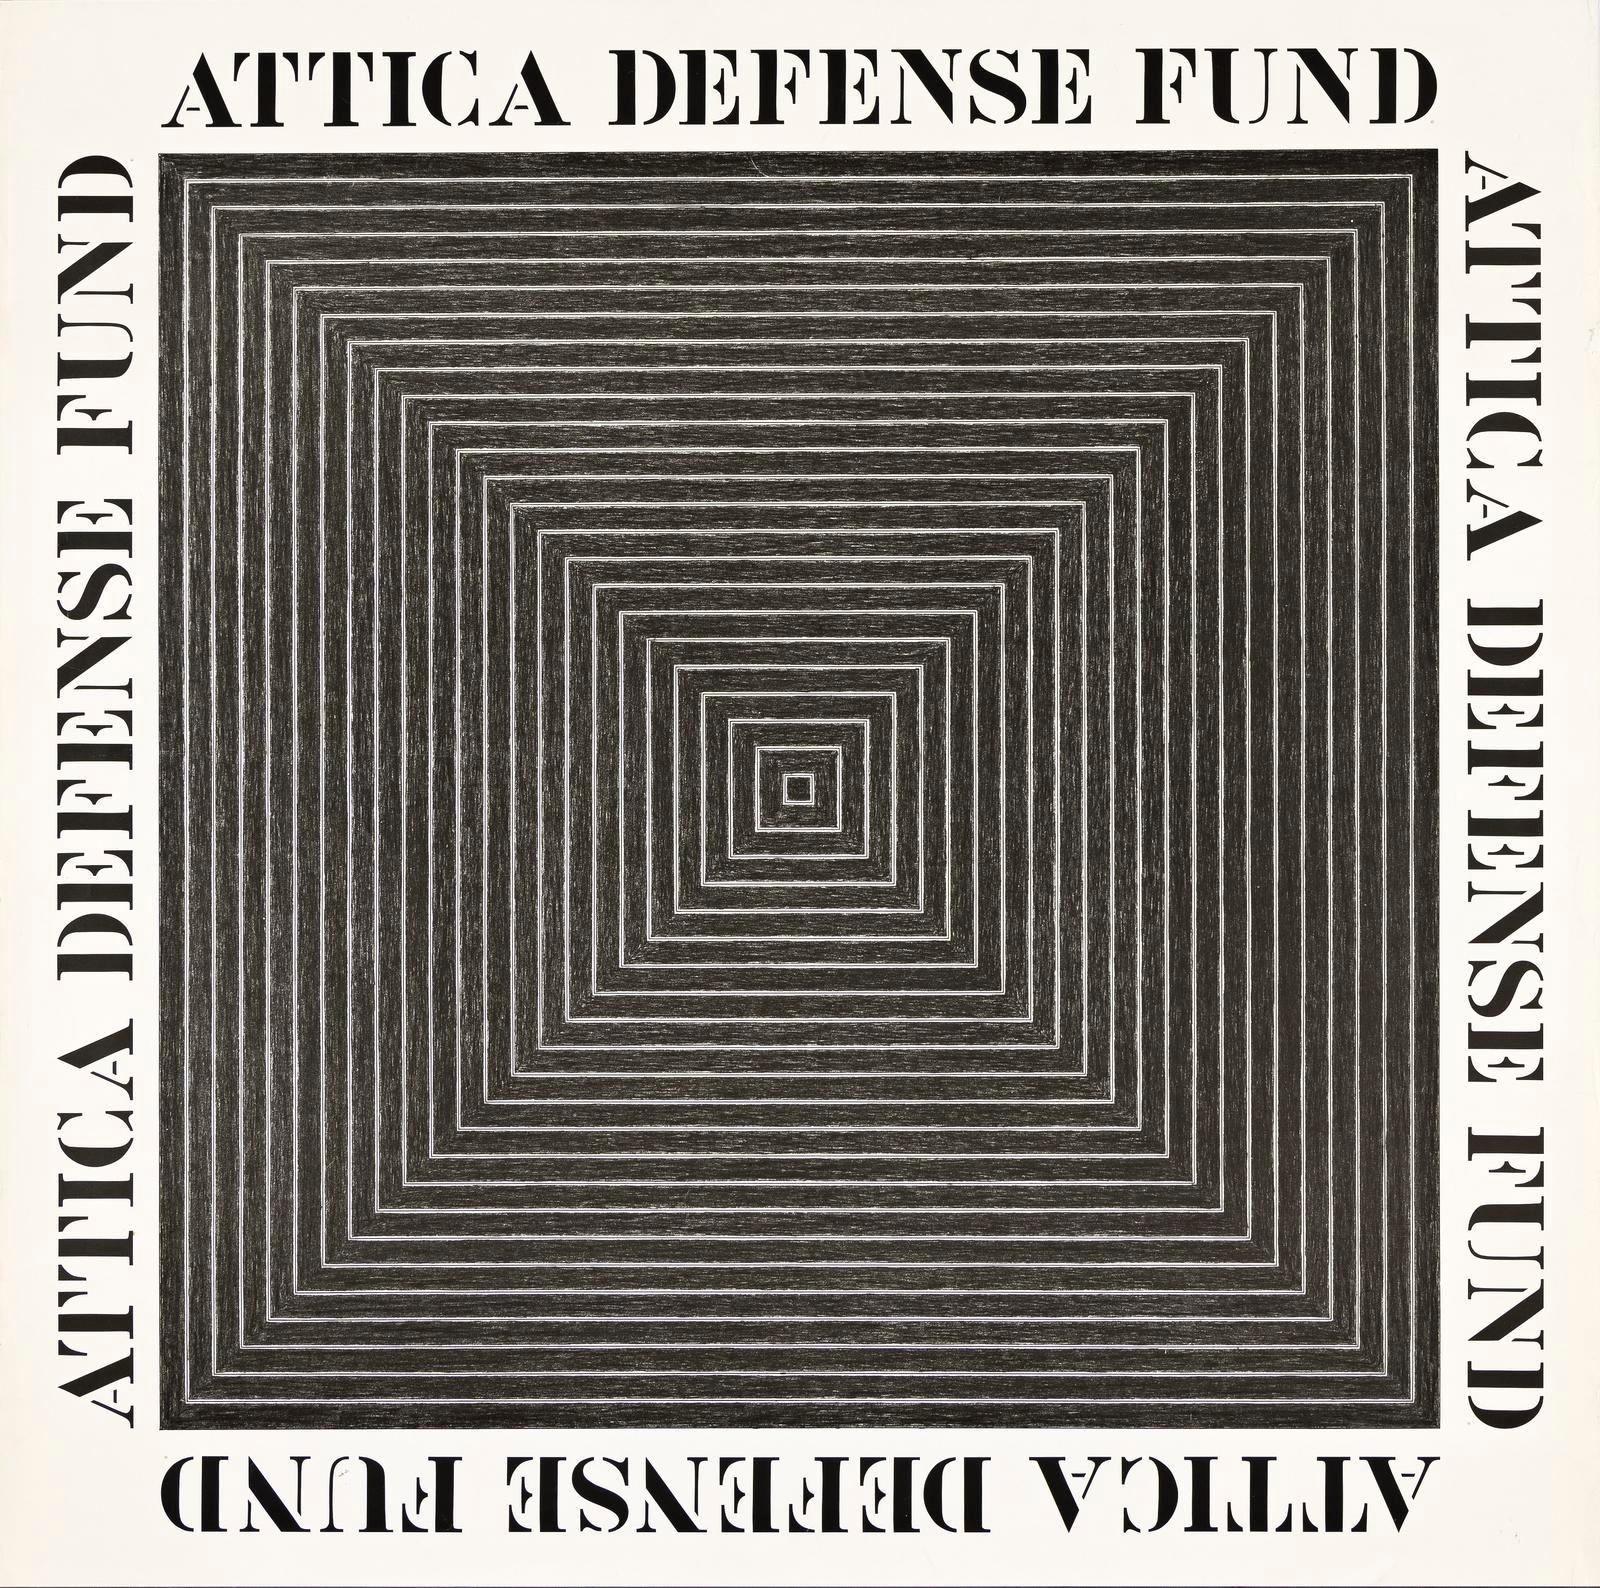 Attica Defense Fund, historic Limited edition 1970s poster on lithographic paper